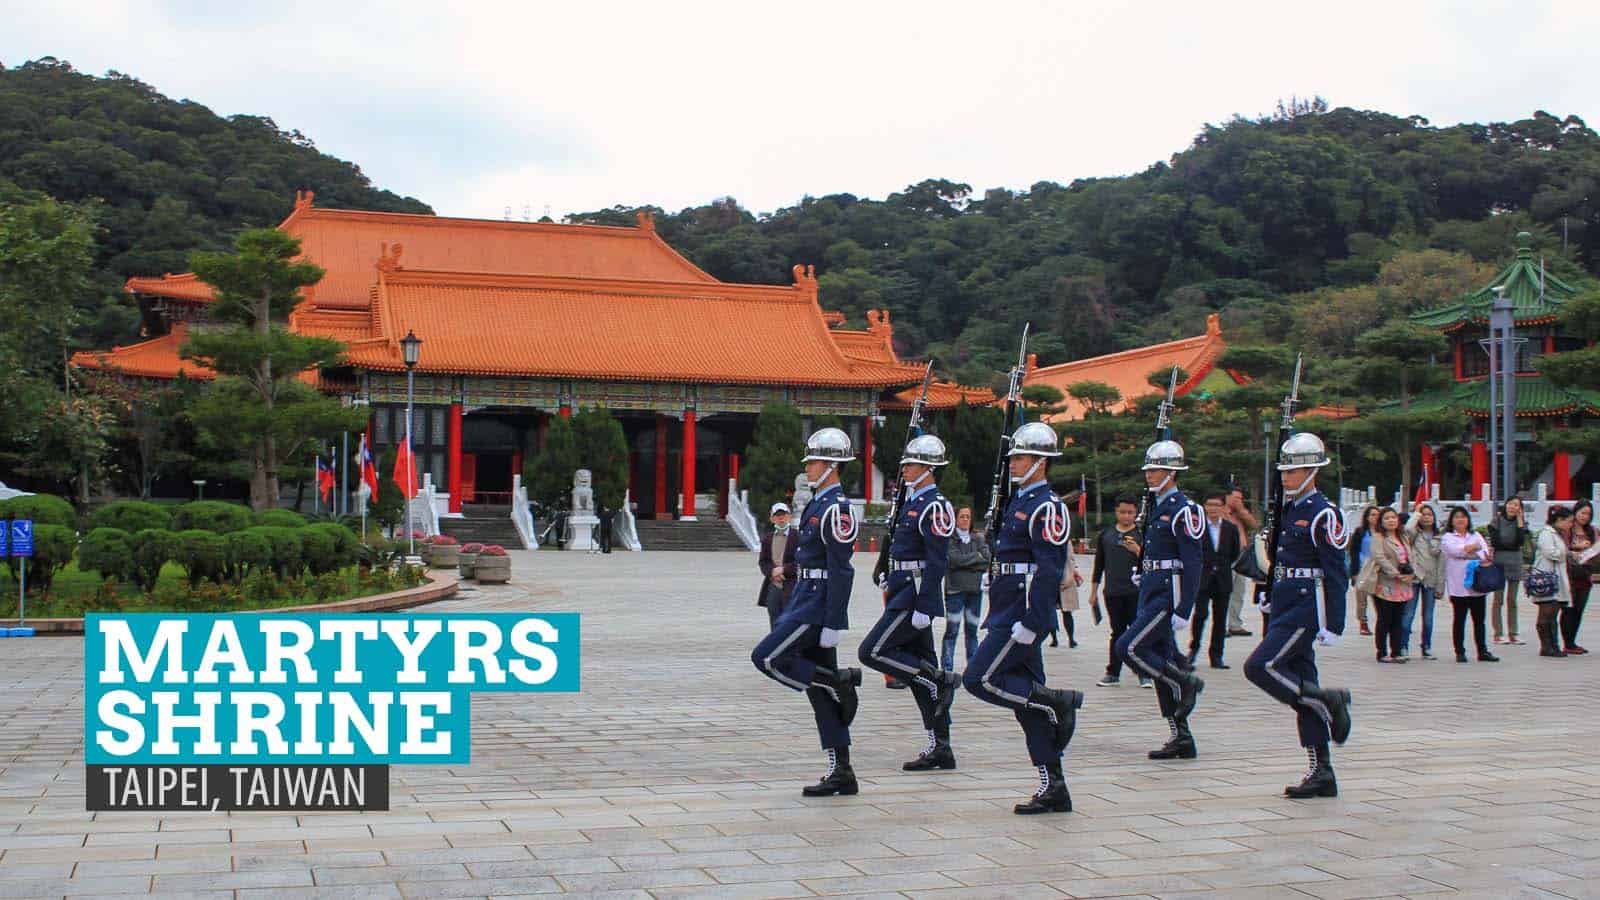 The Changing of the Guards at the Martyrs’ Shrine, Taipei, Taiwan